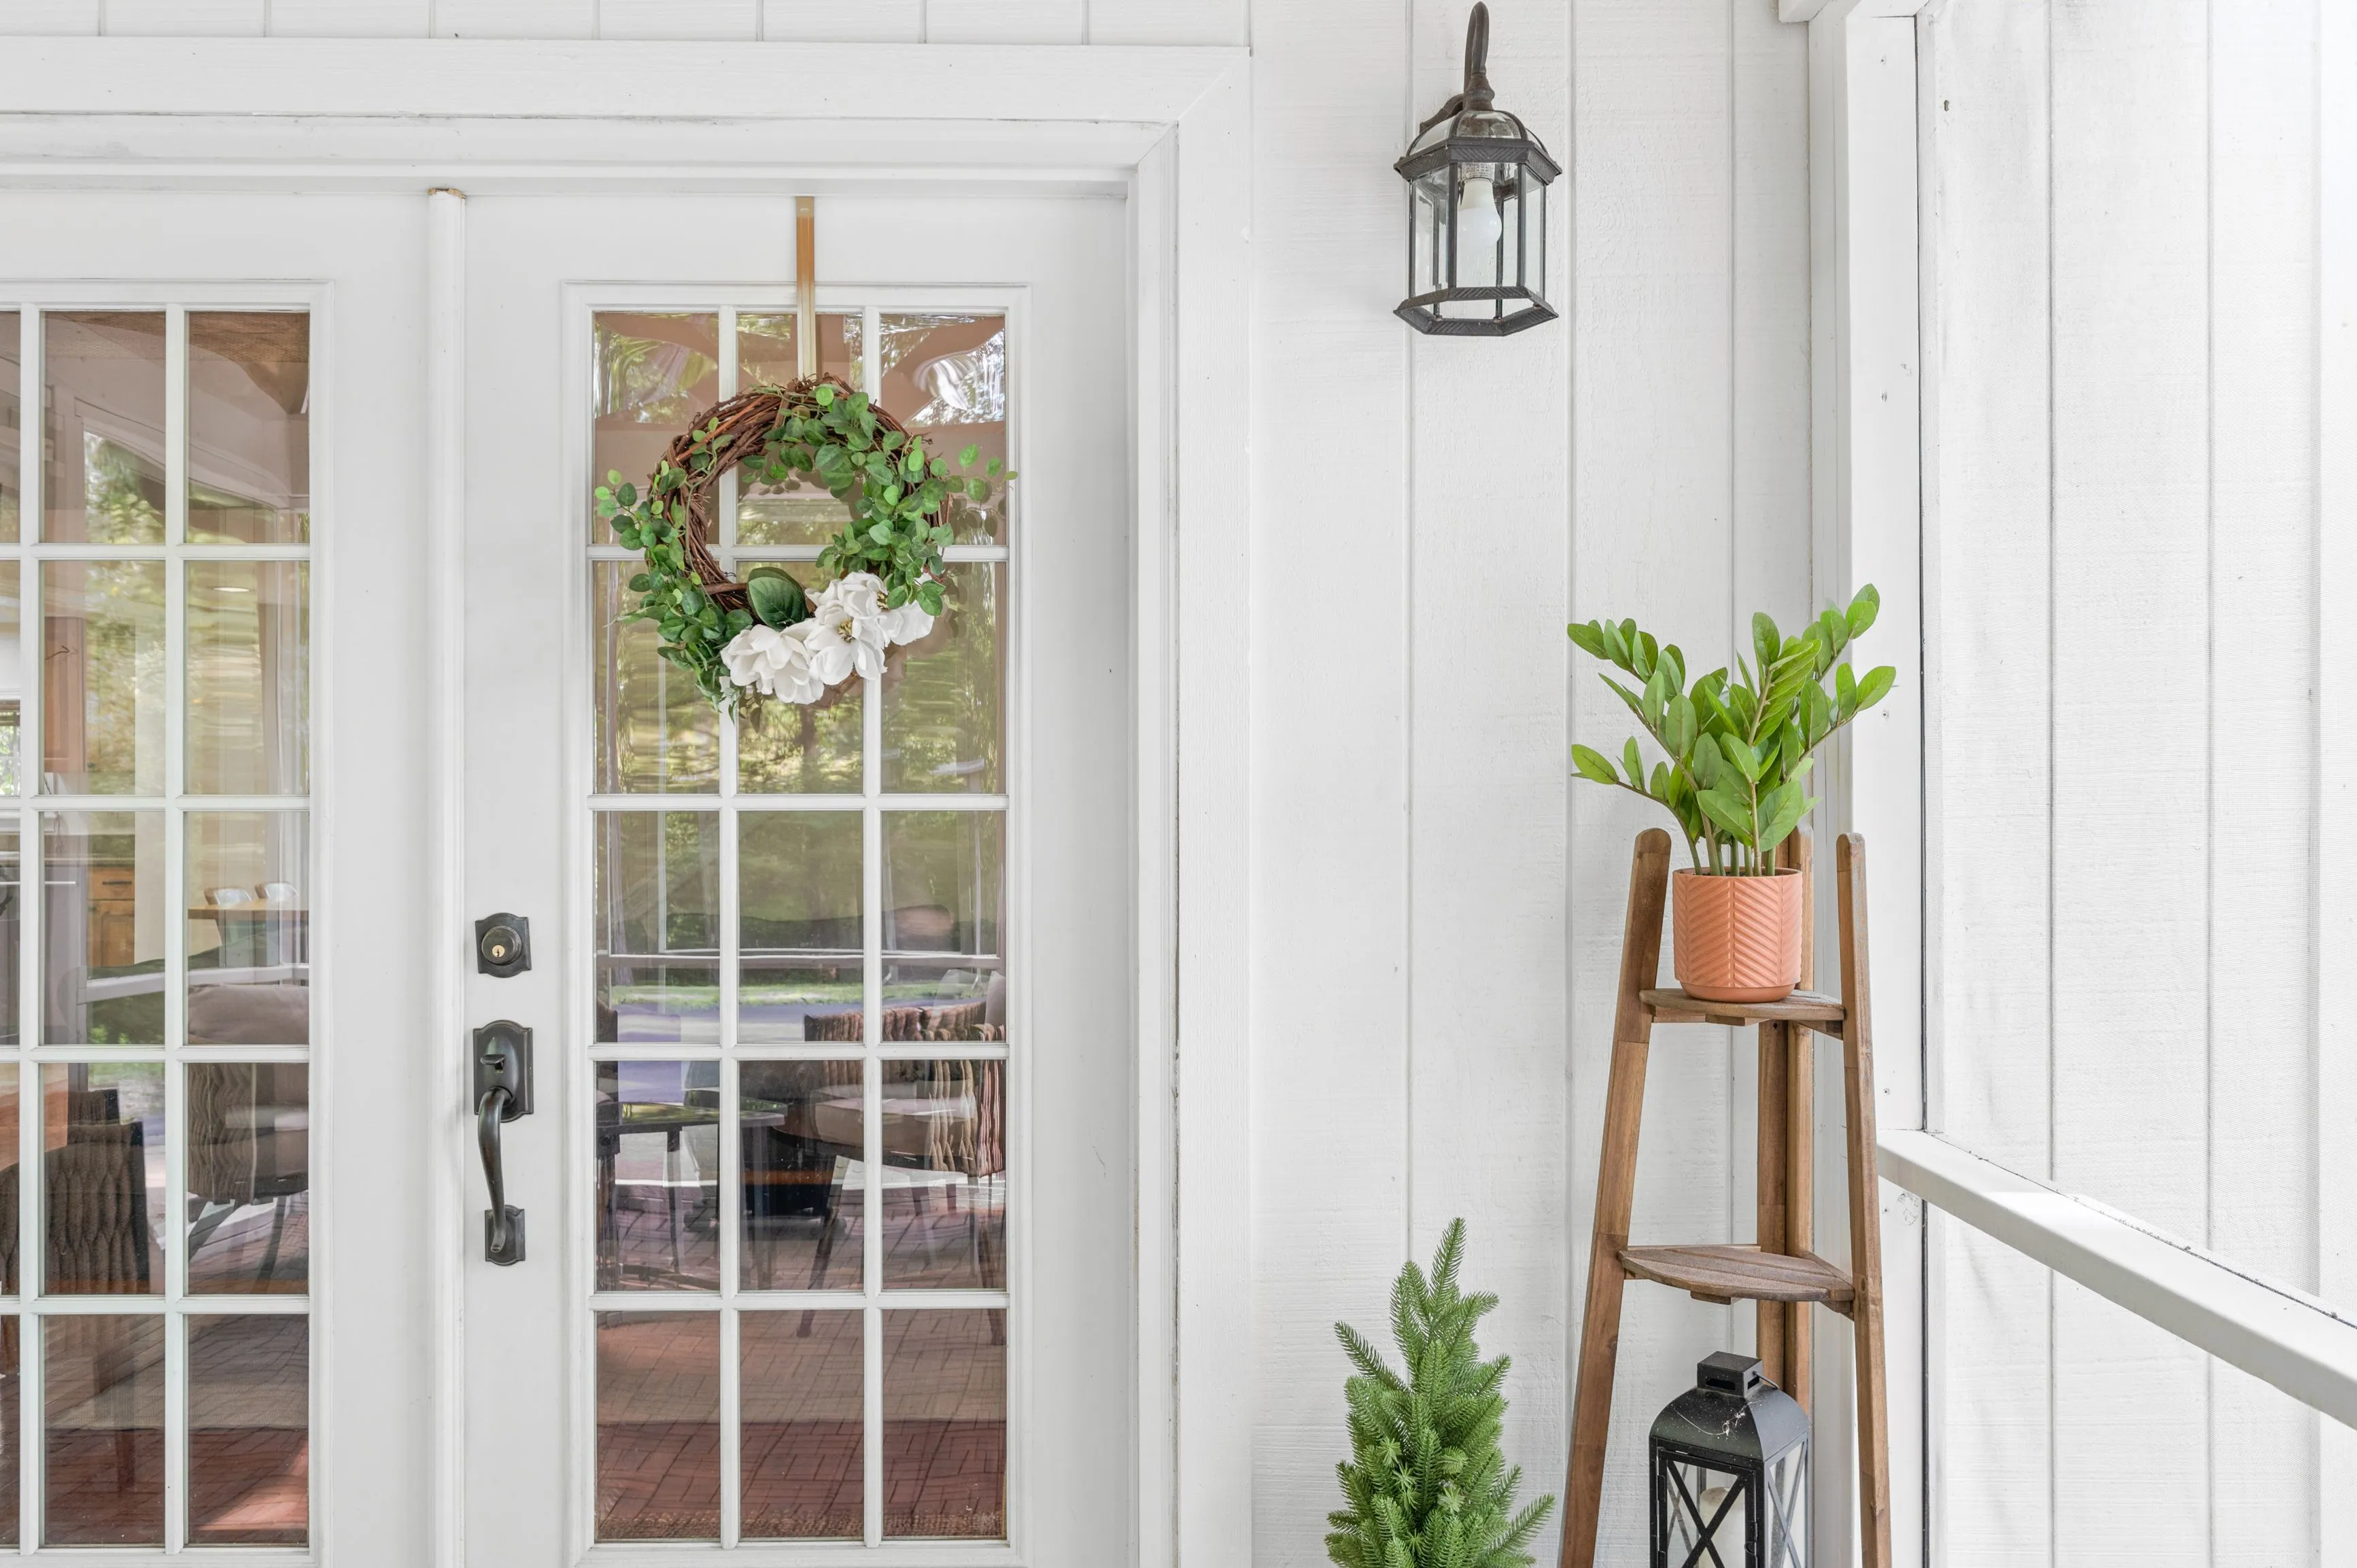 White entrance door with a wreath, glass panels, and a plant on a stool beside a hanging lantern.